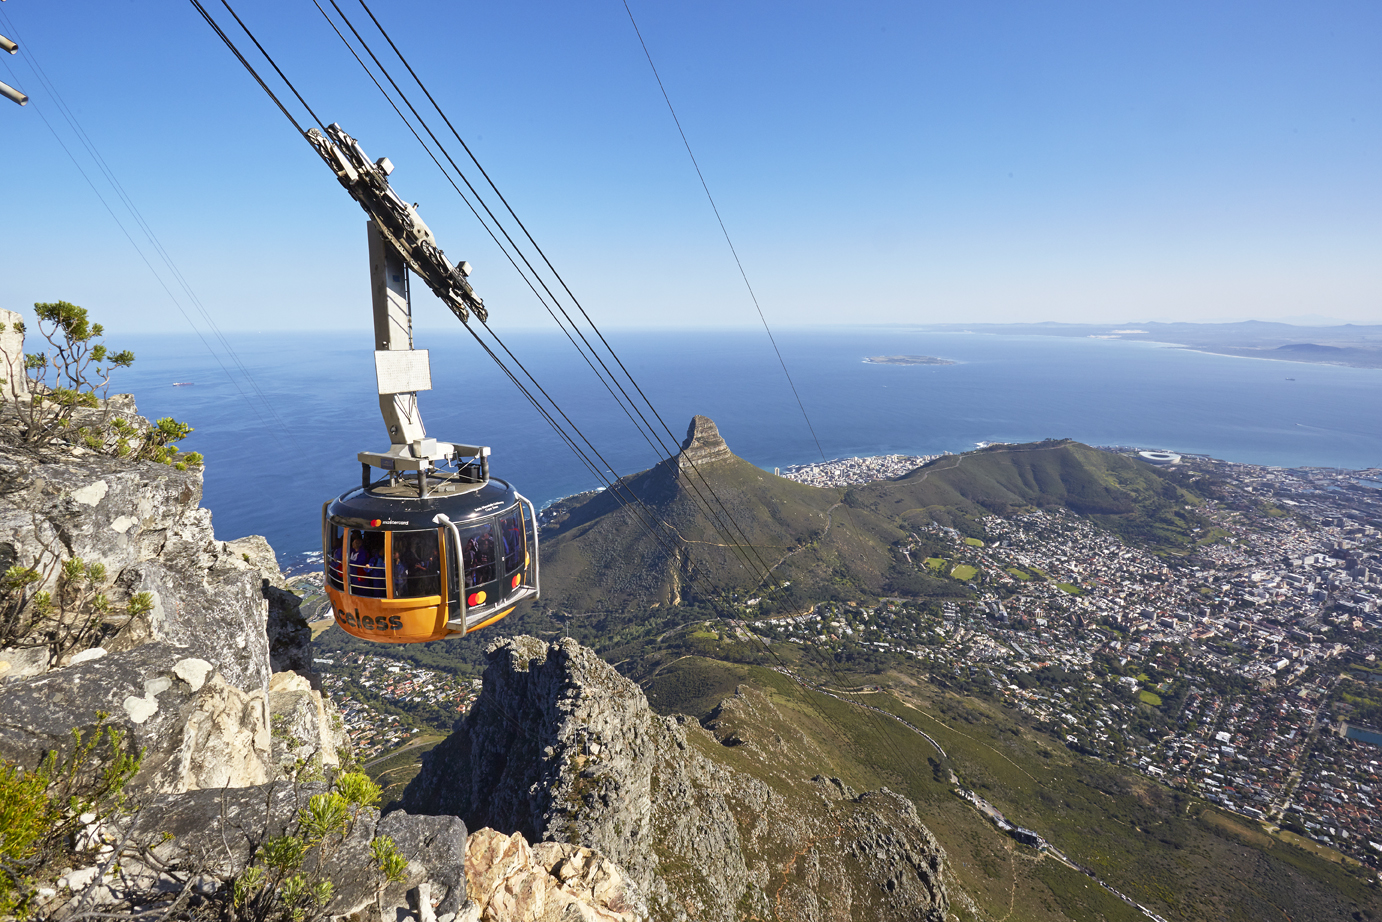 Birthday The history of an iconic landmark, the Table Mountain cableway